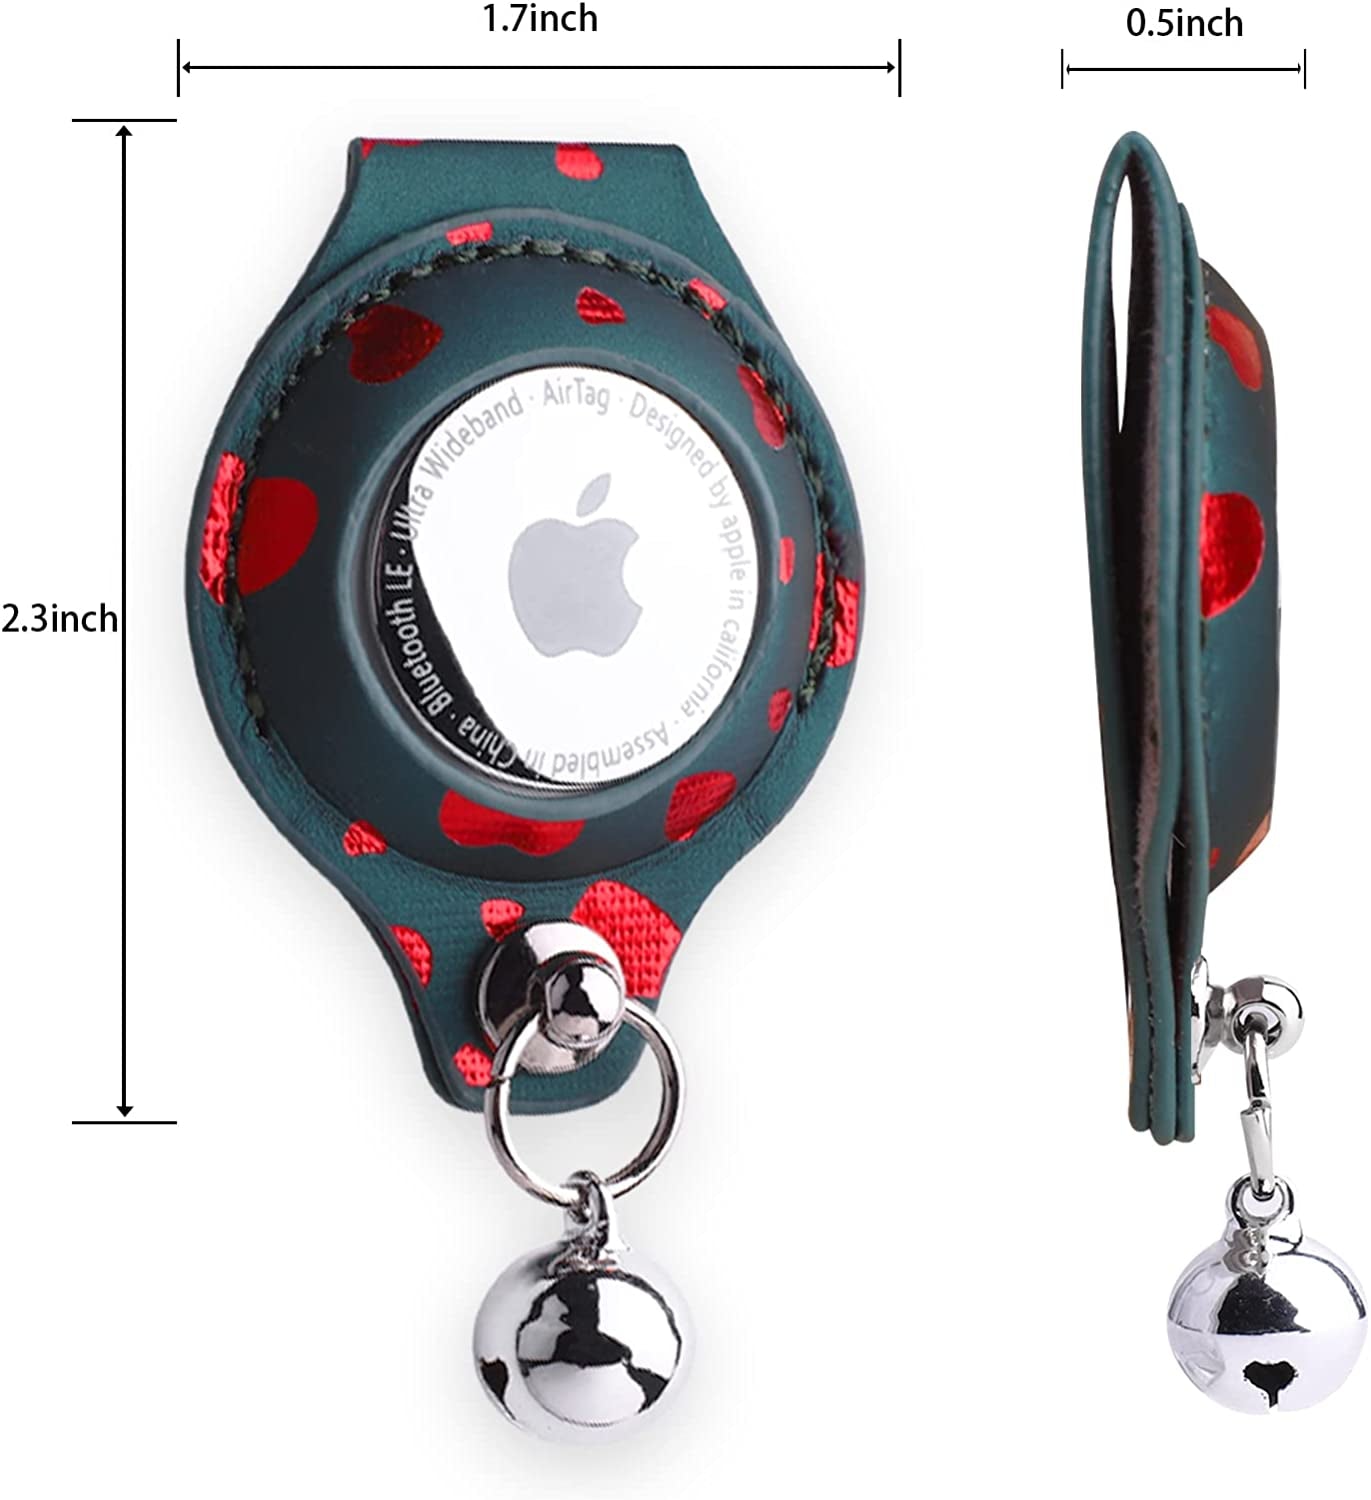 Decorbea Airtag Holder- Airtag Dog Collar Holder(2 Pack)- Dog Airtag Holder in Fashionable Design -PU Leather Pet Collar Case for Apple Airtags Electronics > GPS Accessories > GPS Cases Decorbea   